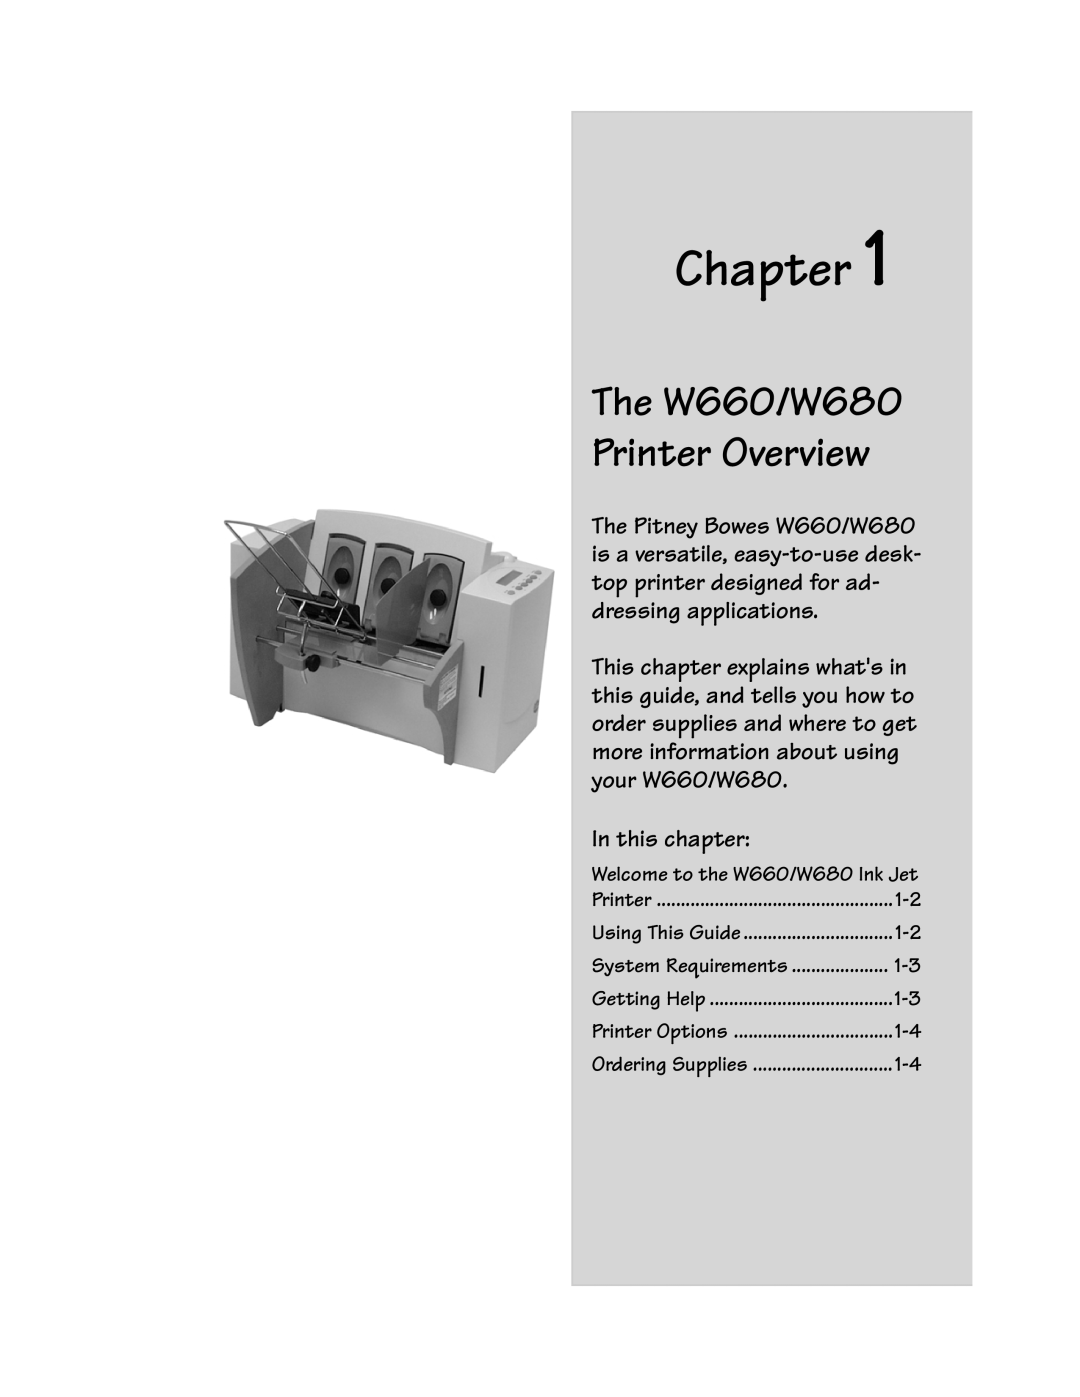 Pitney Bowes manual Chapter, In this chapter, The W660/W680 Printer Overview 